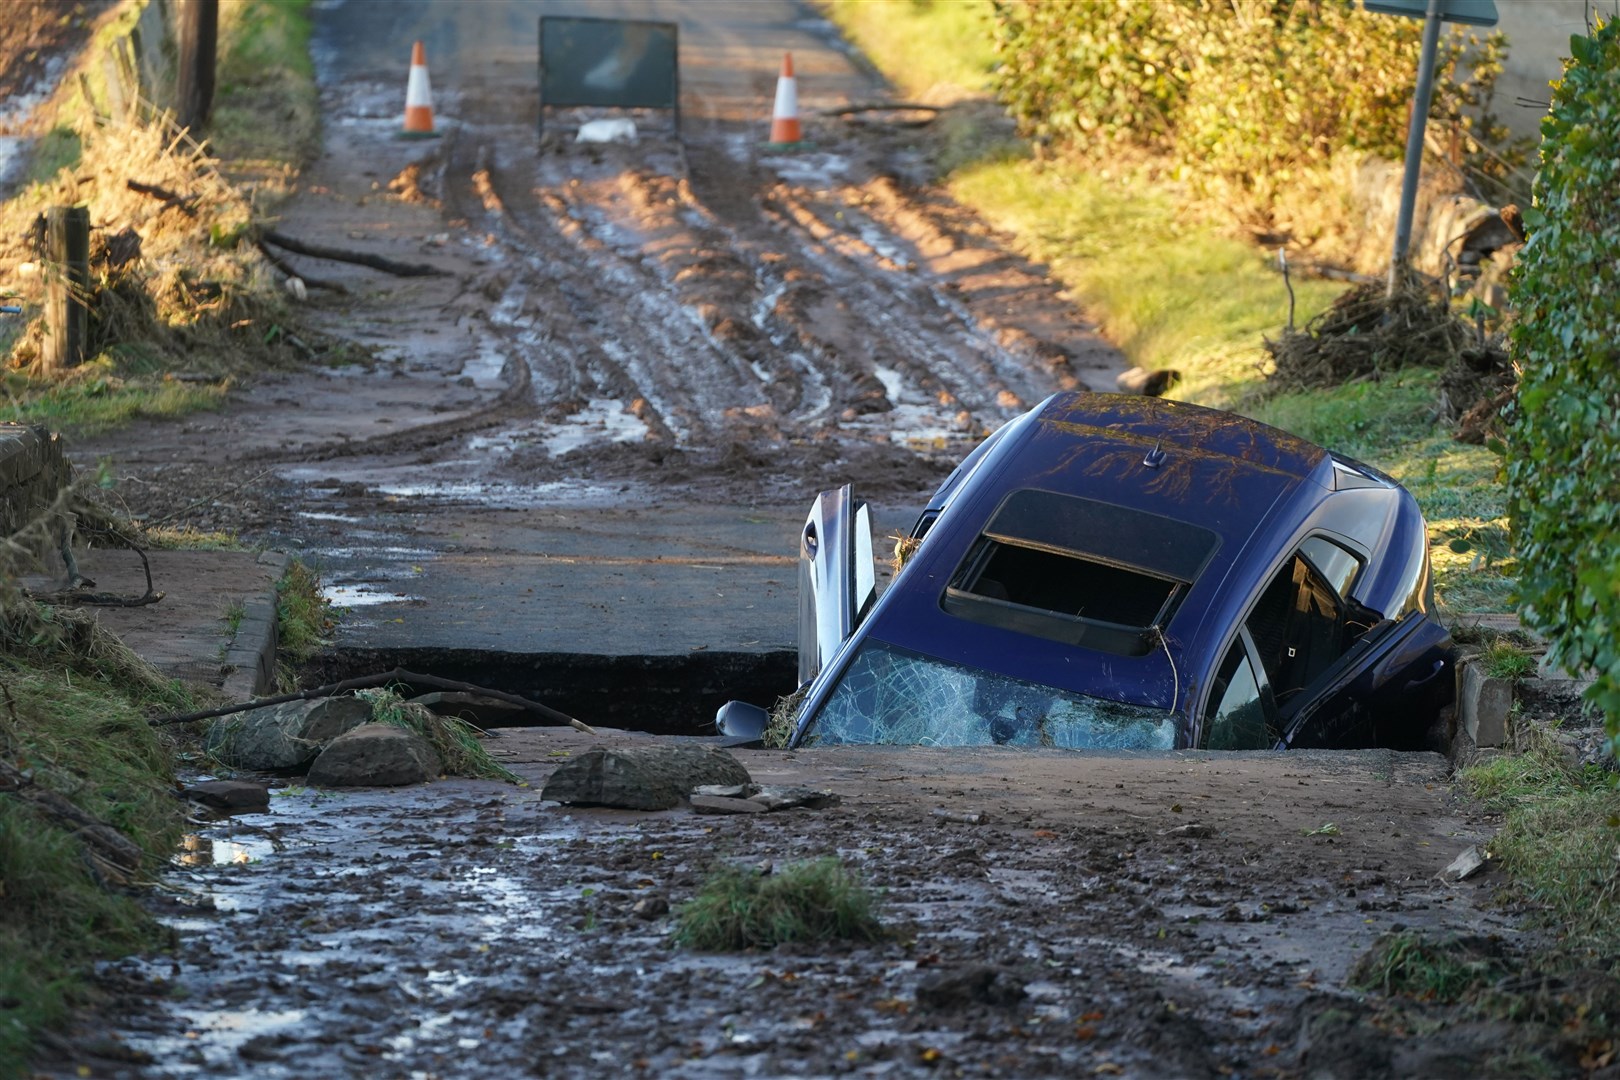 Damage from extreme weather is increasing across the globe, including the UK (Andrew Milligan/PA)